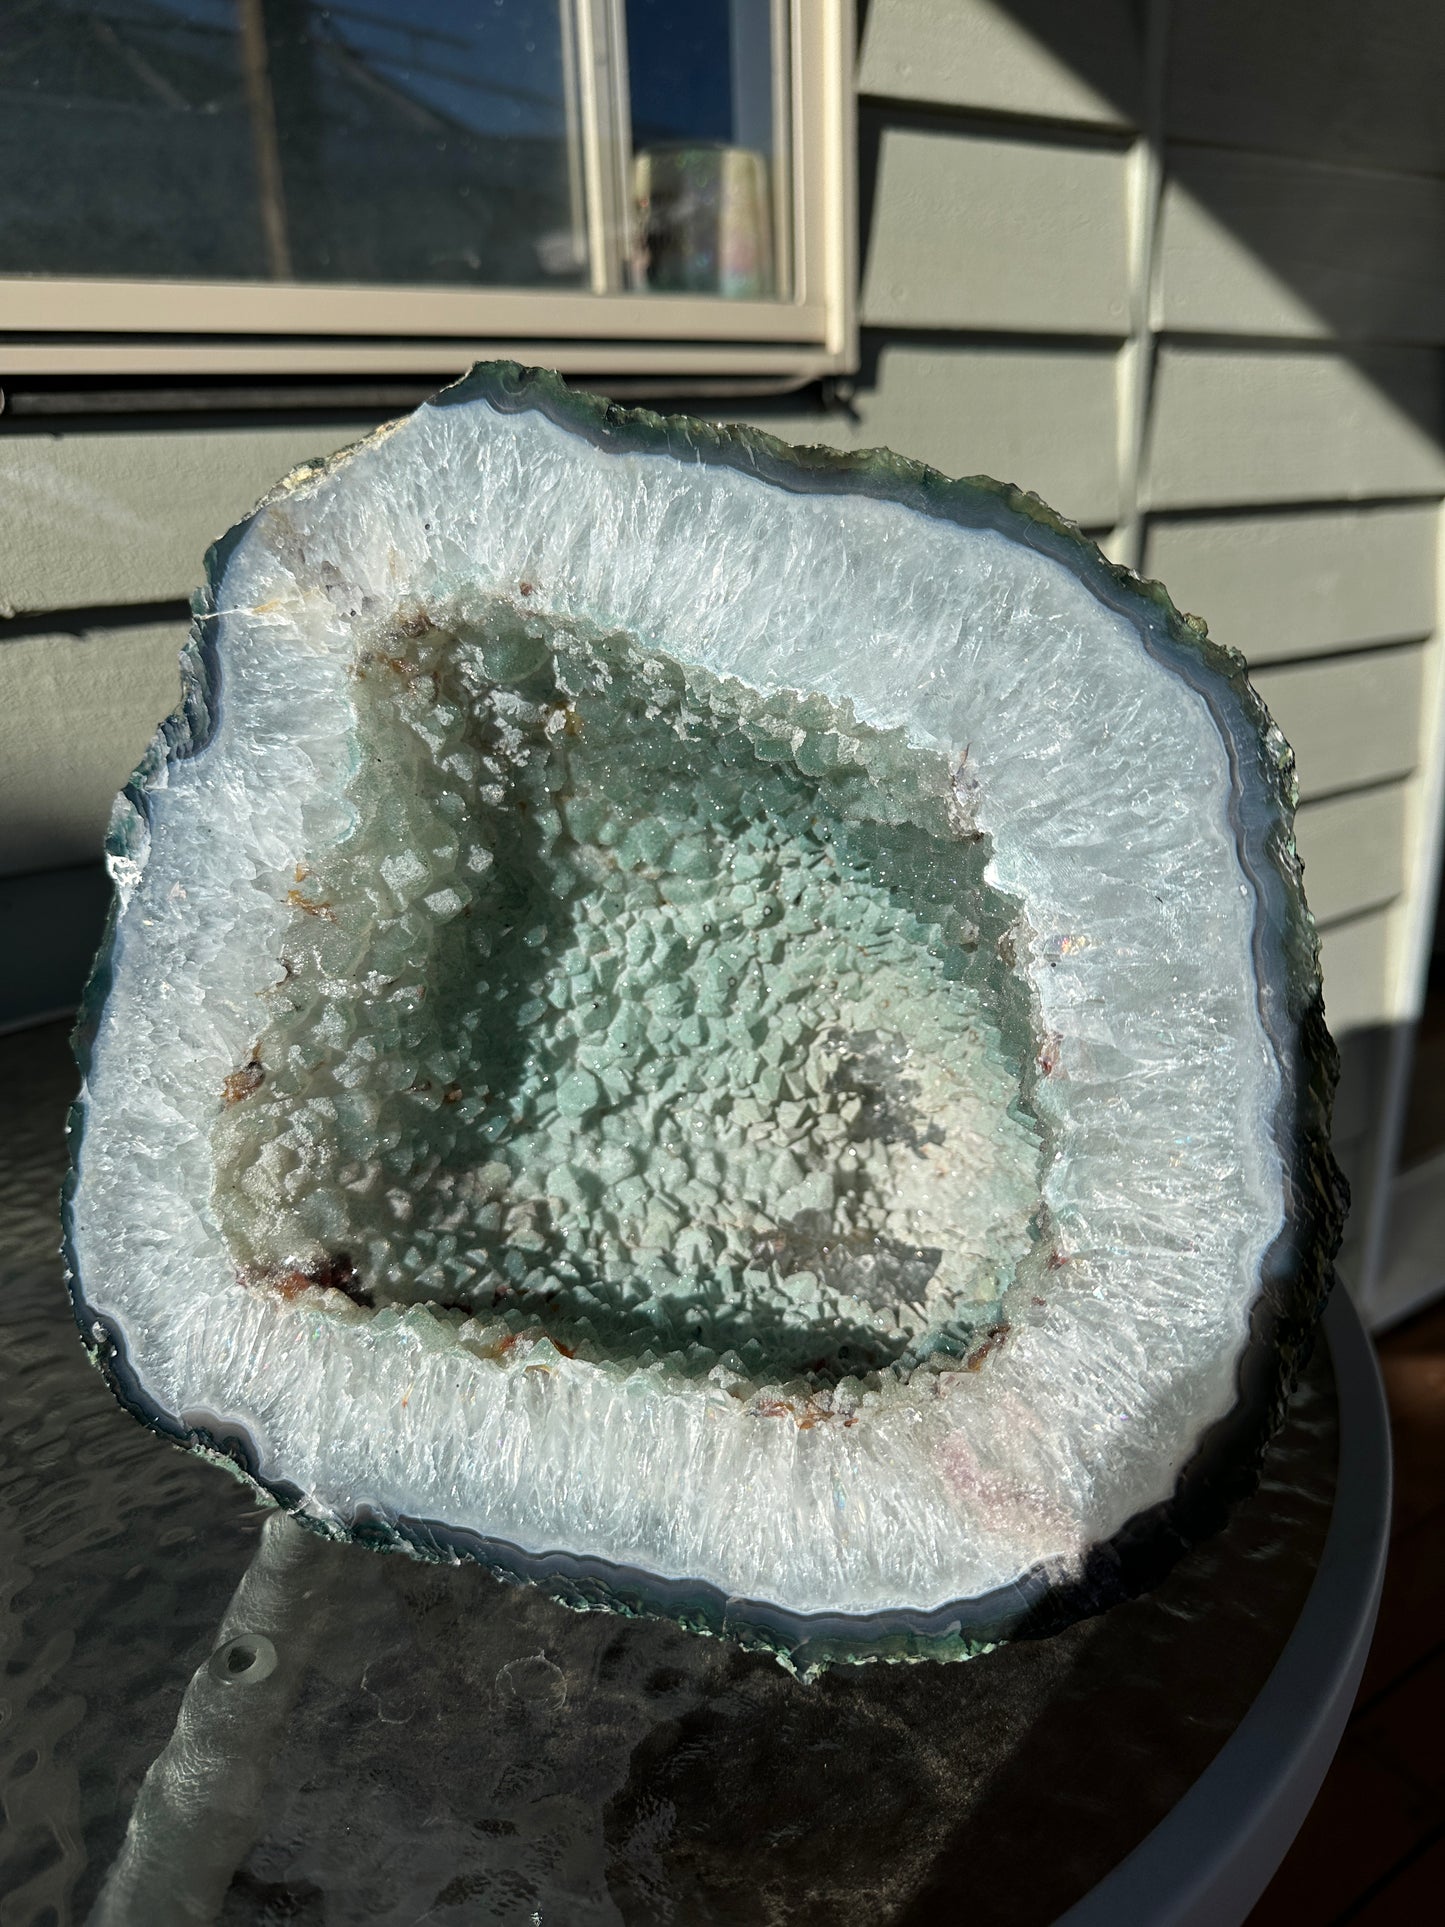 Collectors Piece Mint Green Candy Amethyst Geode formation on spinning stand